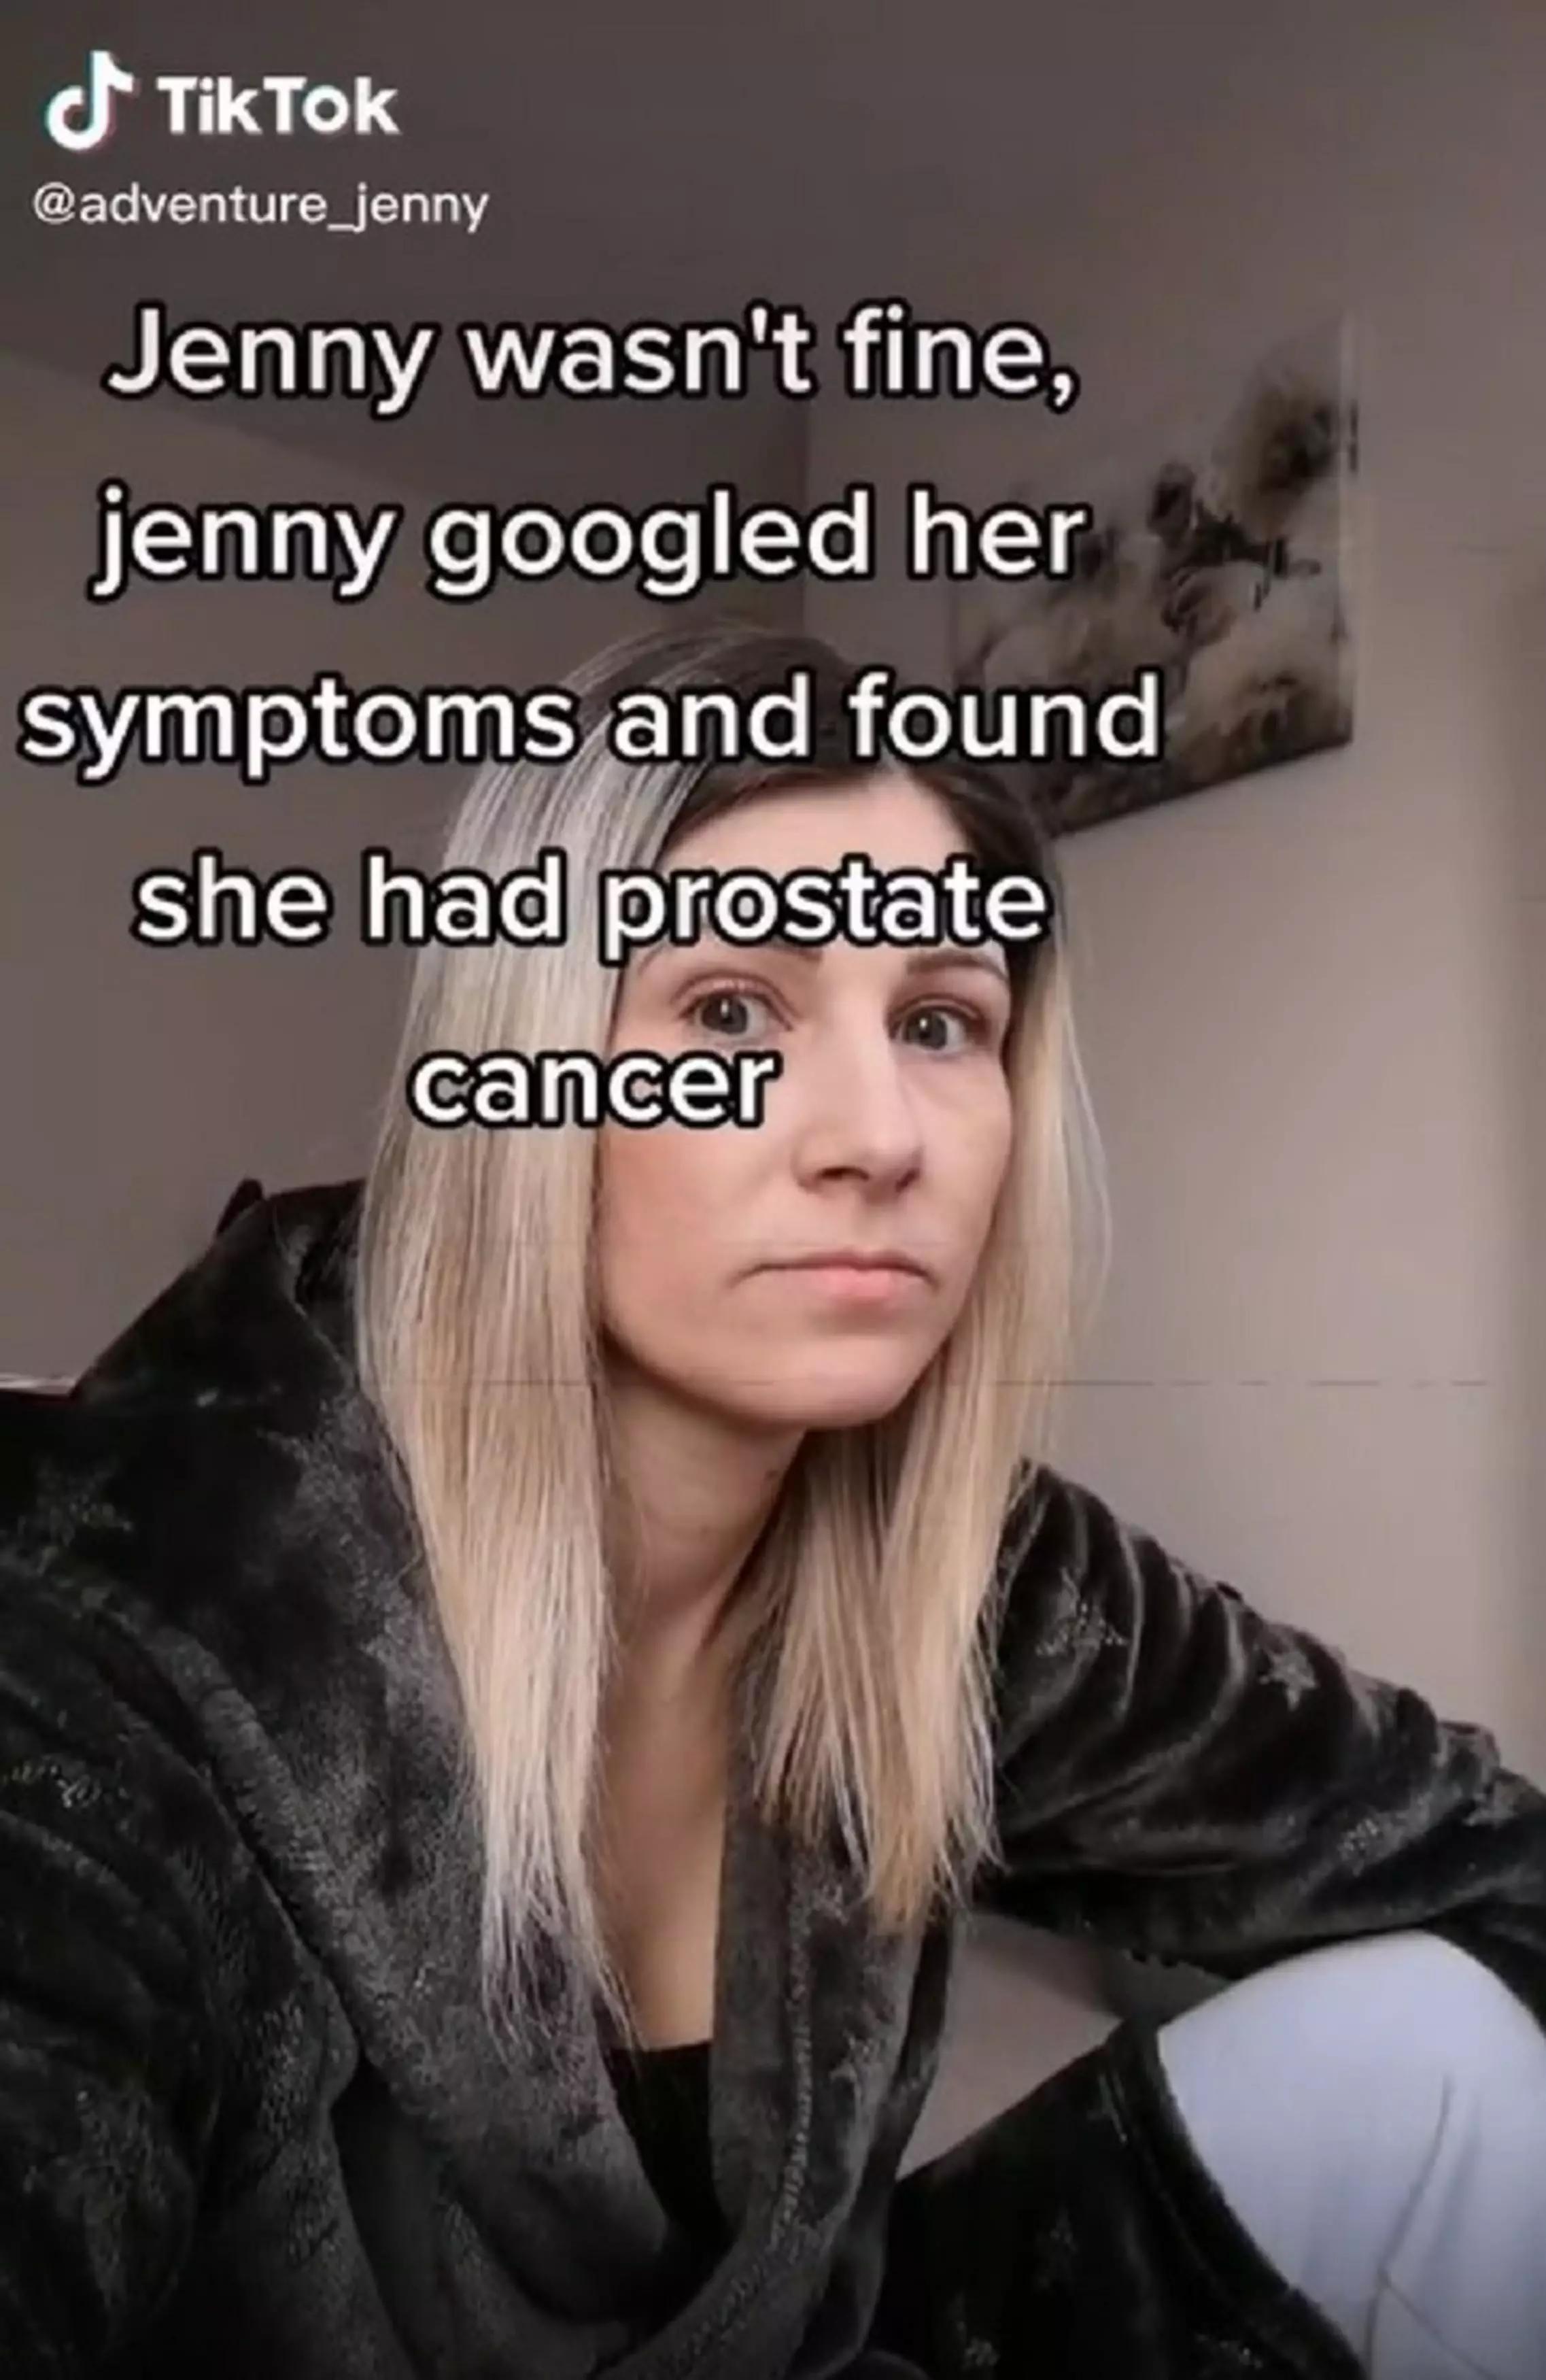 Jenny described having to change doctors because she felt so embarrassed (